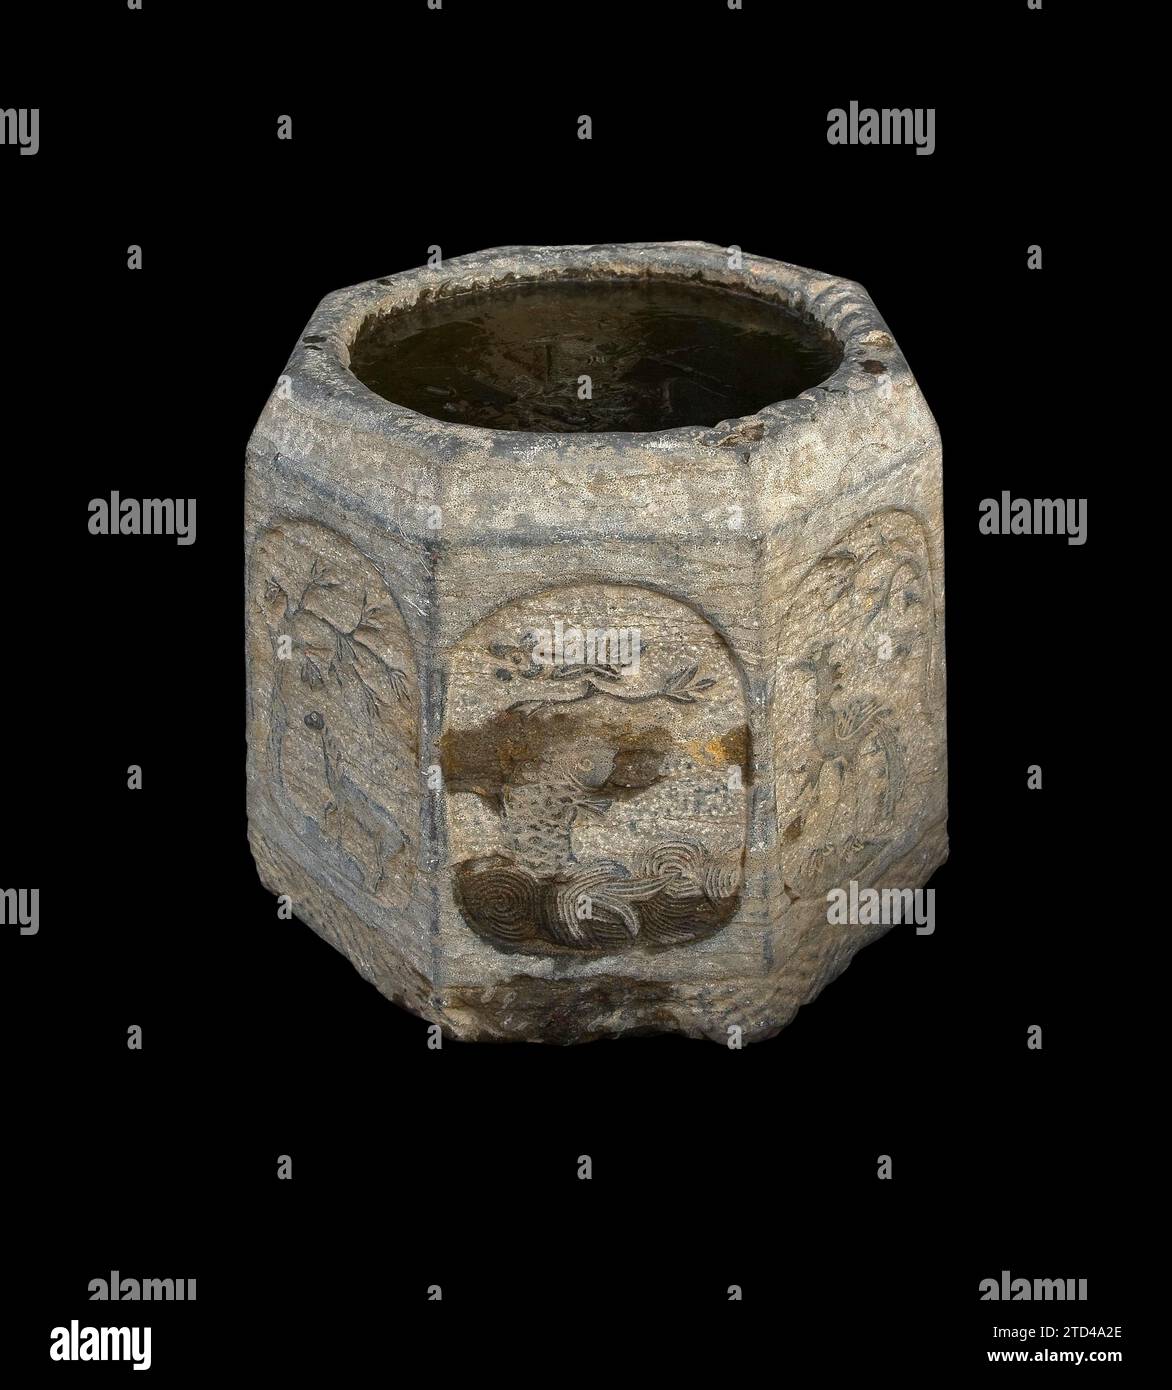 Ancient stone bucket finely carved with iced water over black backgroungd Stock Photo